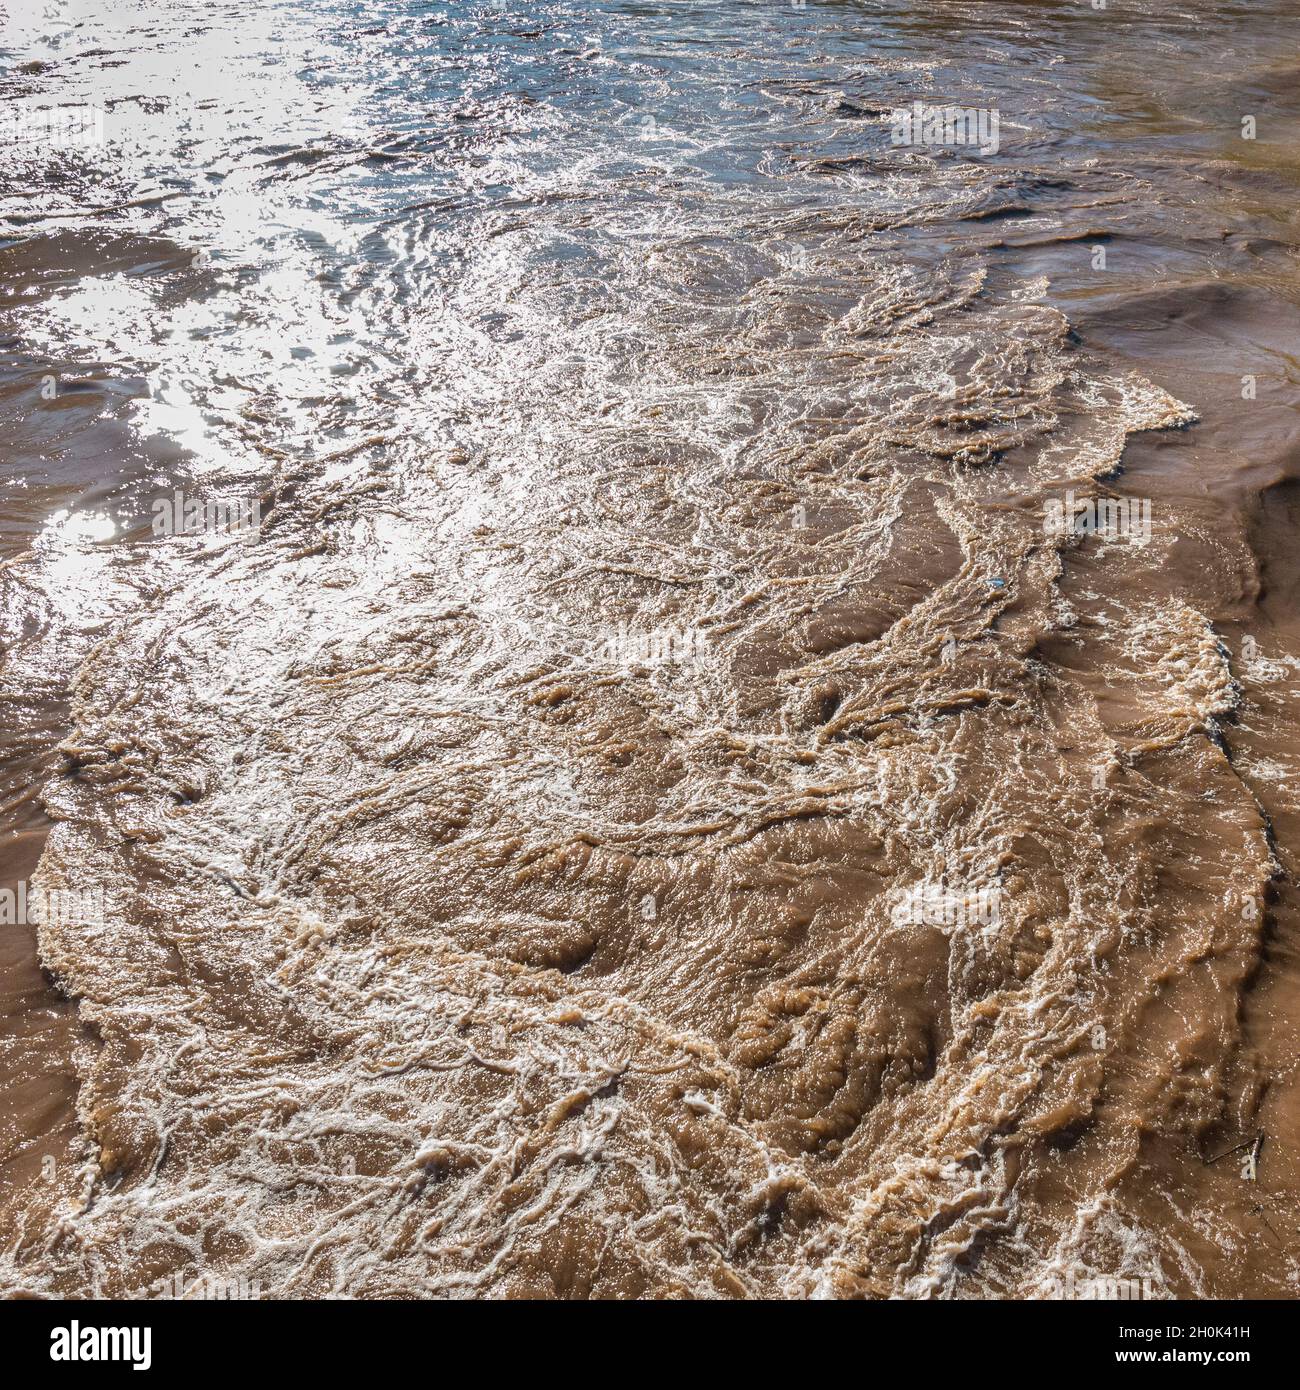 Artistic view of turbulent muddy flooded river water Stock Photo